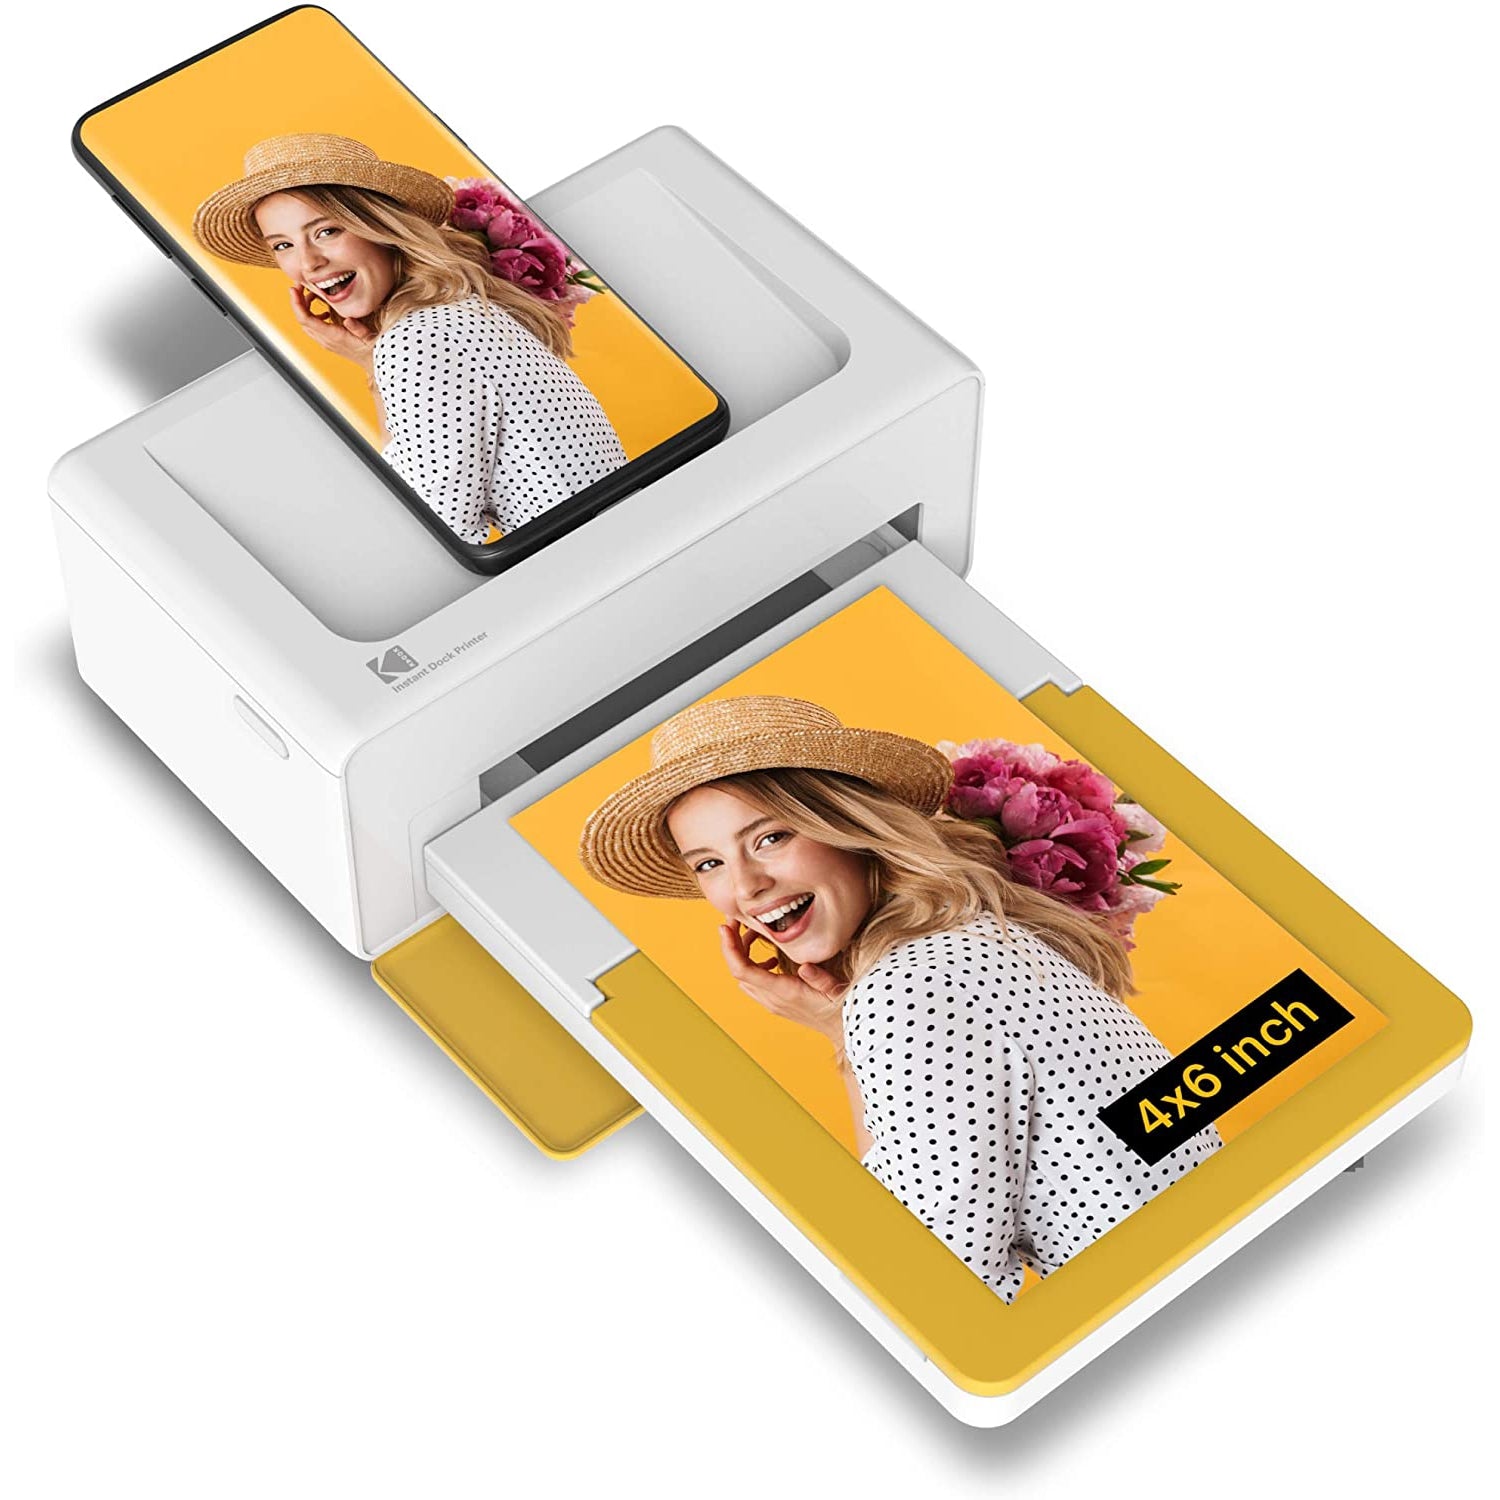 Kodak PD460 Dock Plus, 4x6" Instant Wireless Photo Printer, Compatible With All Bluetooth And Smartphone Devices, White